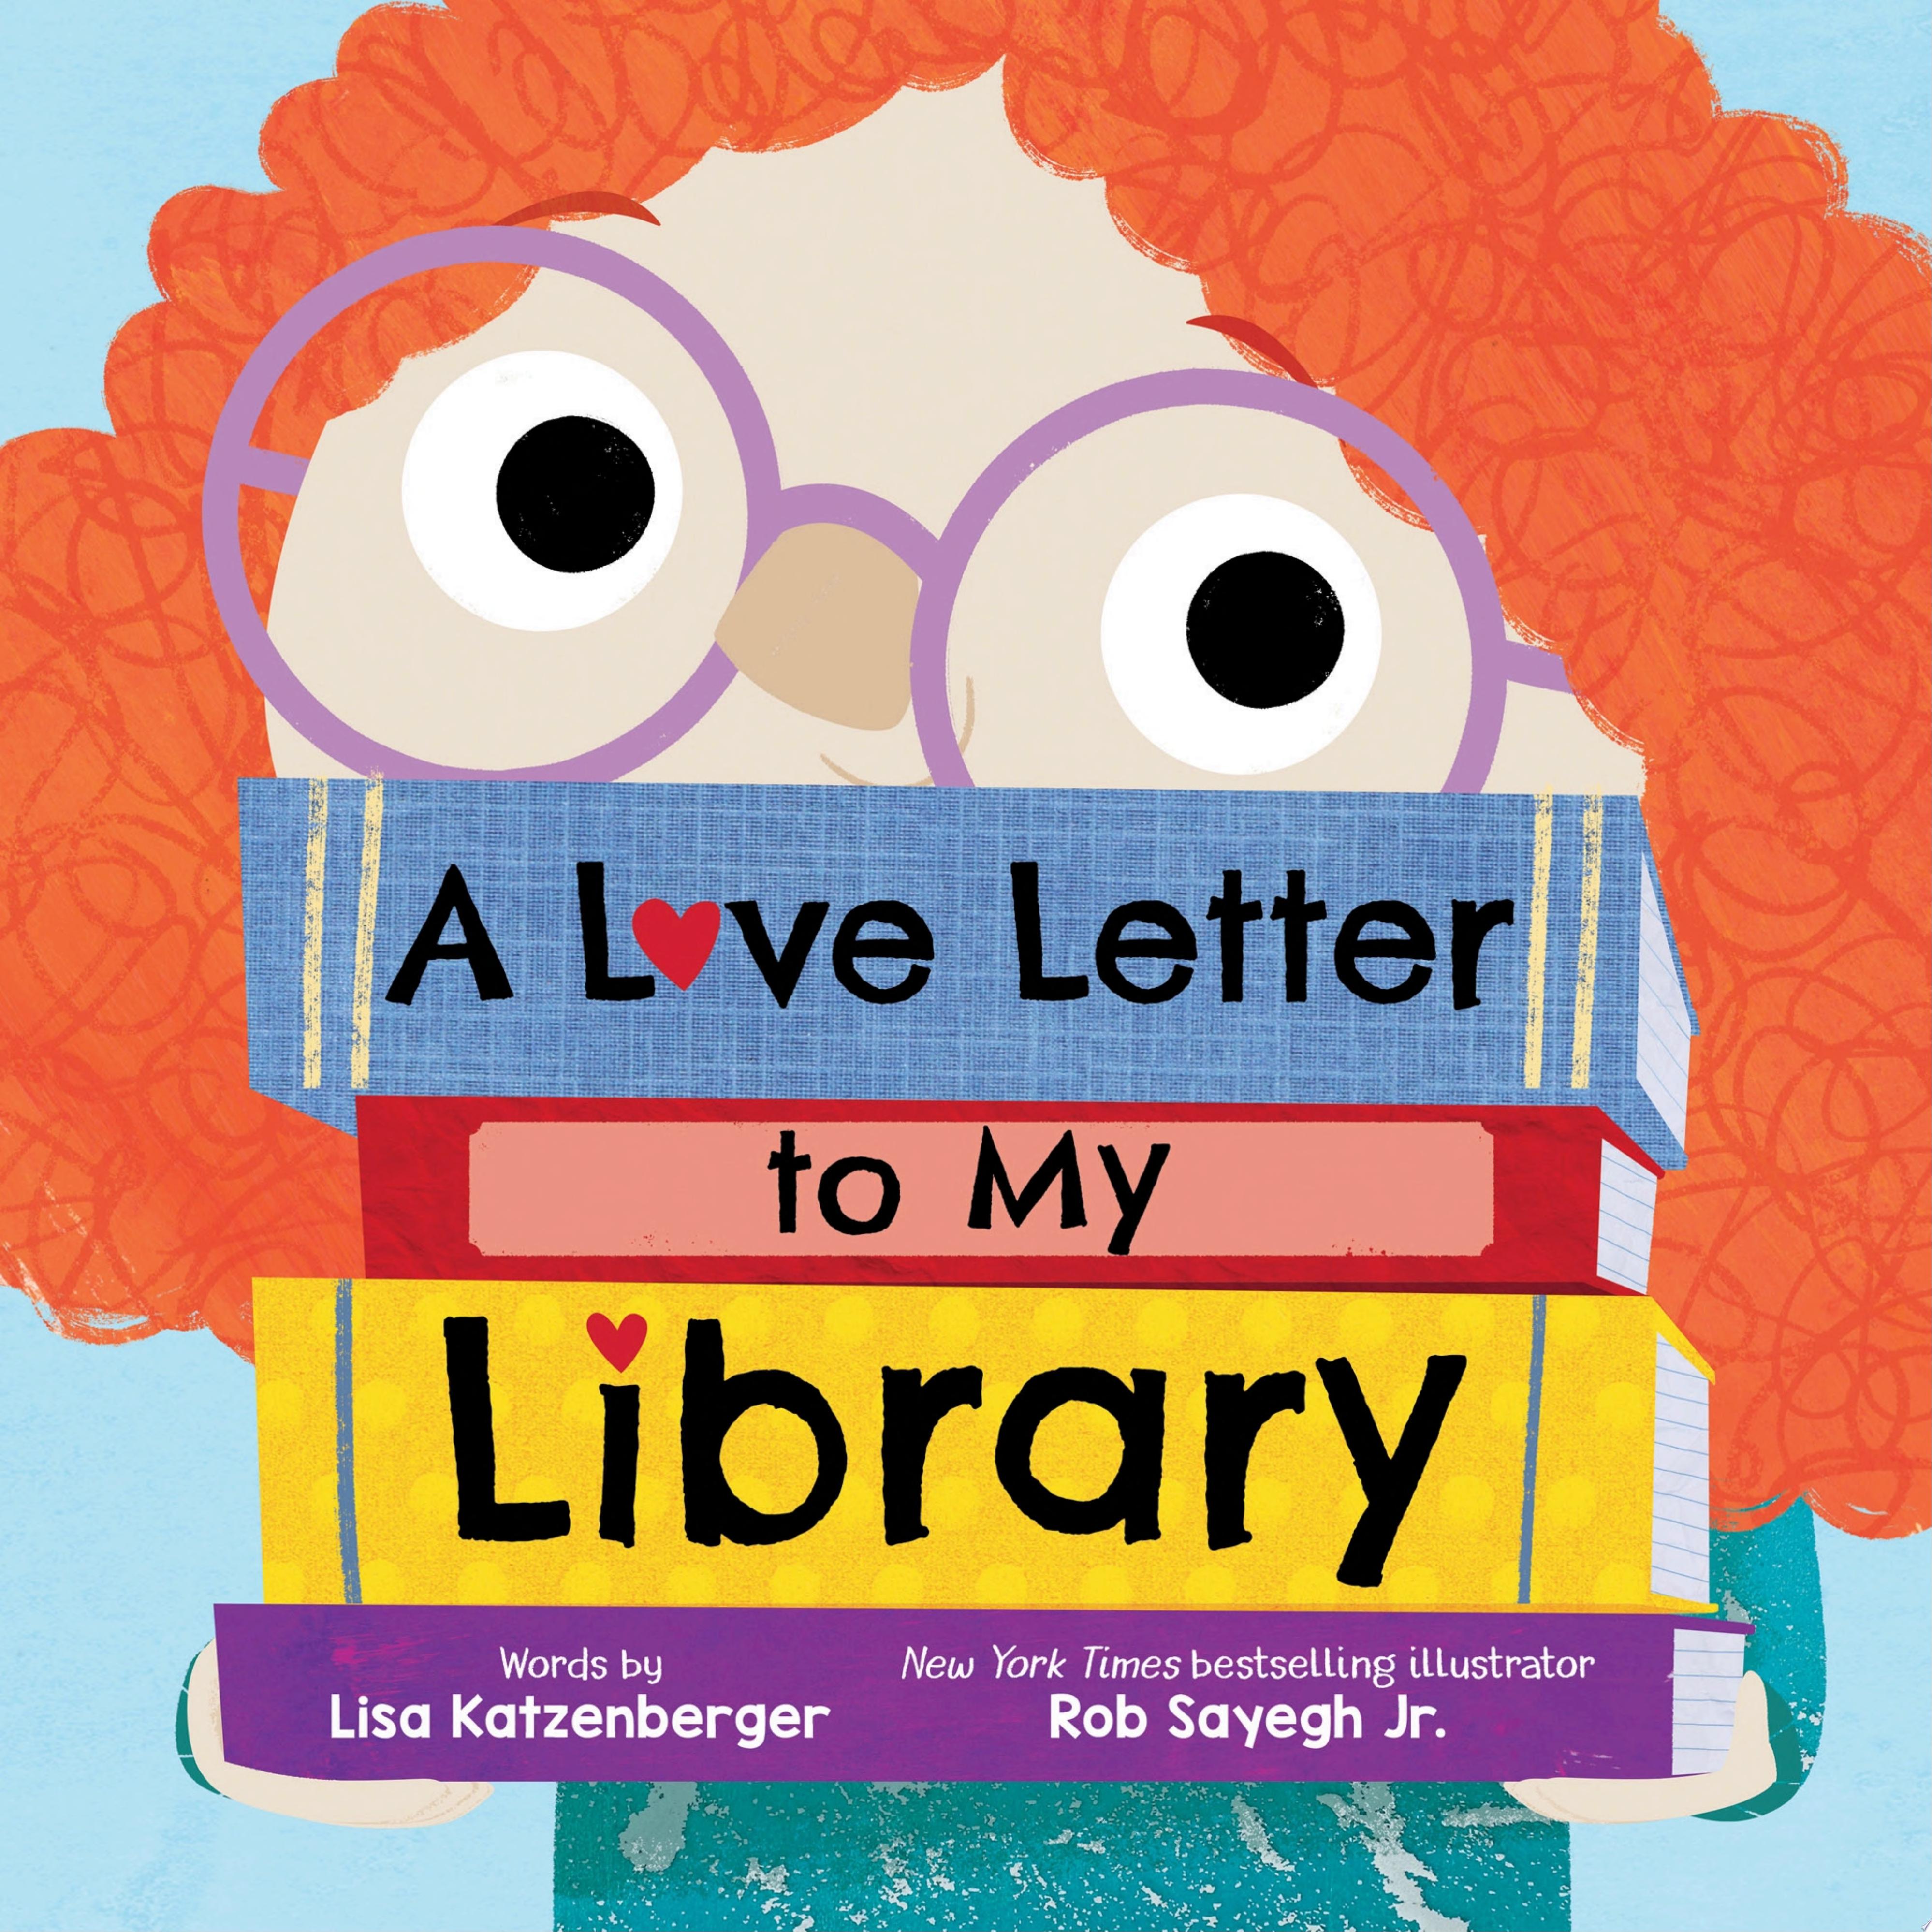 Image for "A Love Letter to My Library"